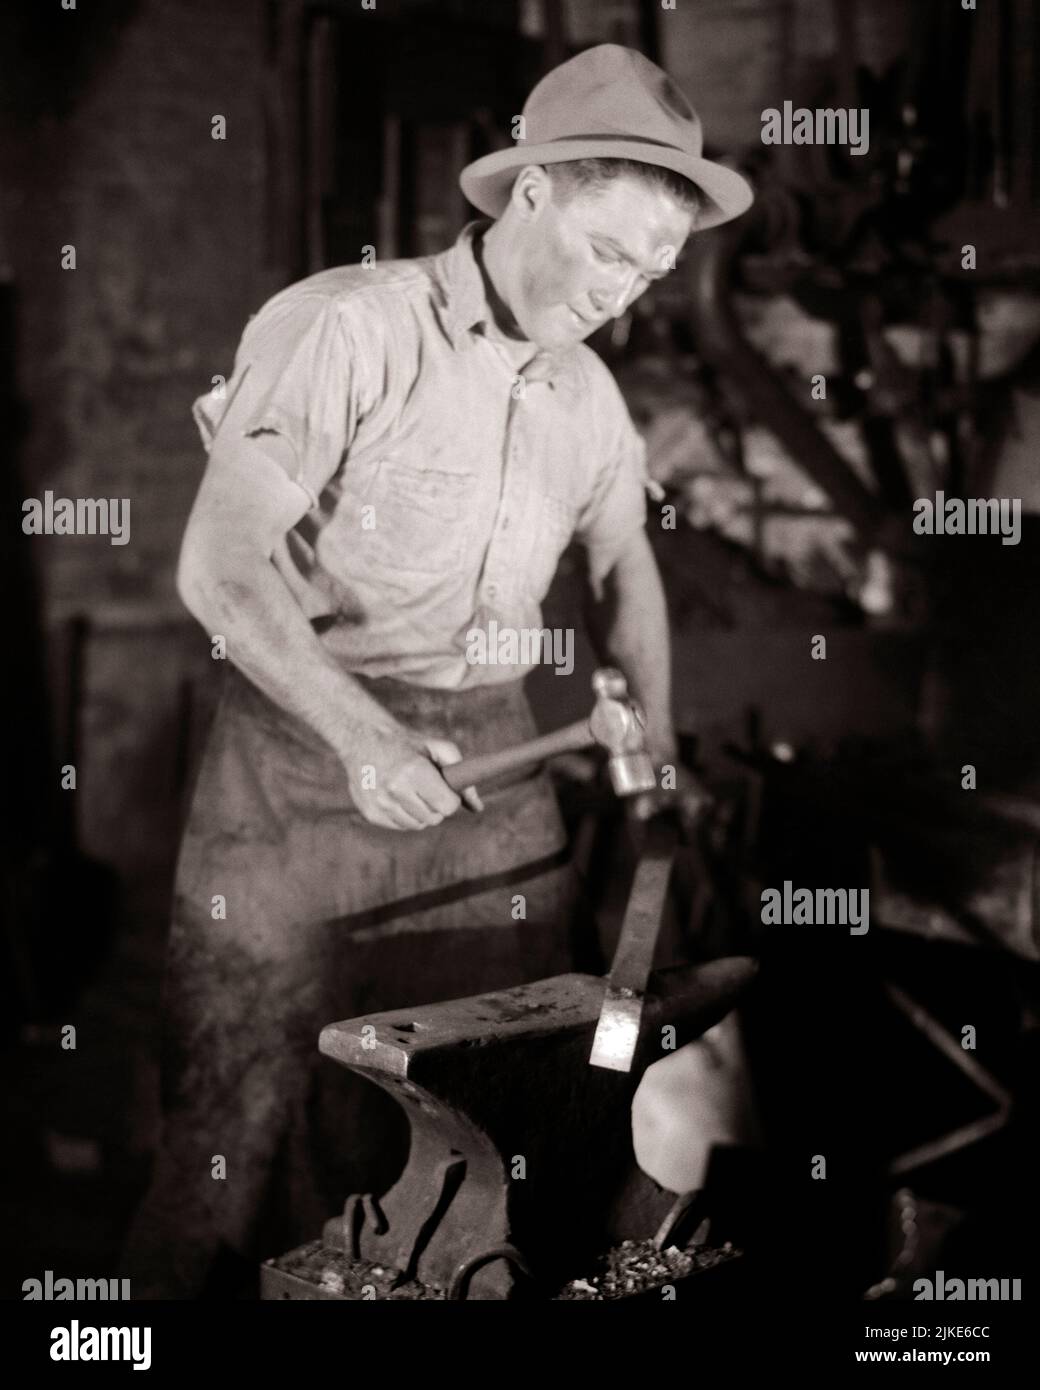 1930s MAN IN FORGE WORKING A PIECE OF HEATED METAL WITH BALL PEEN HAMMER ON AN ANVIL - i840 HAR001 HARS STRENGTH CAREERS LABOR EMPLOYMENT OCCUPATIONS CONCEPTUAL INFRASTRUCTURE EMPLOYEE HEATED ANVIL YOUNG ADULT MAN BLACK AND WHITE CAUCASIAN ETHNICITY HAR001 LABORING OLD FASHIONED Stock Photo